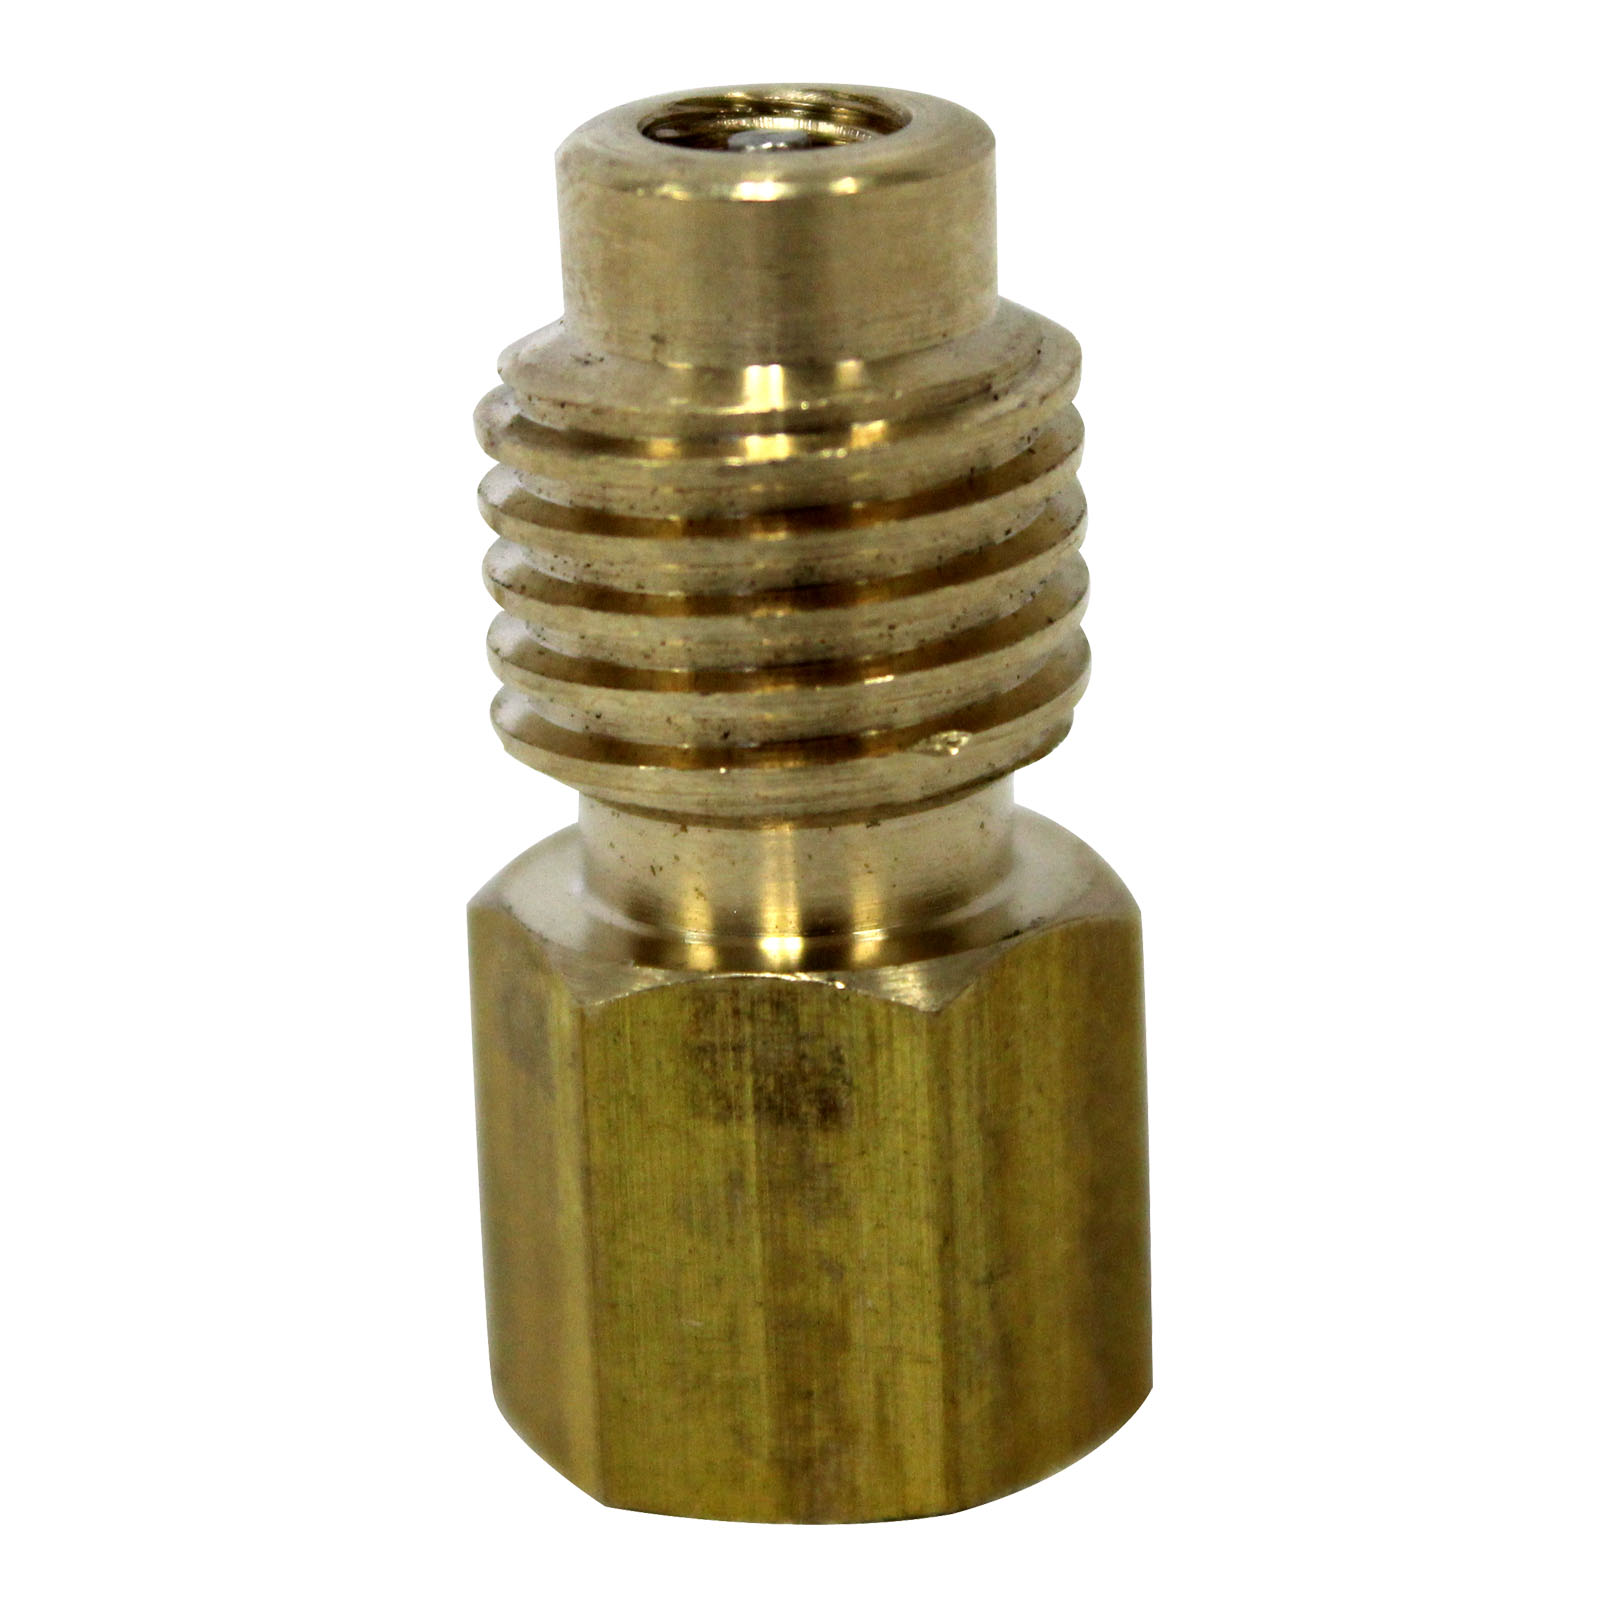 R134A 1/4" N.P.T Less Valve Cor male x 1/2" ACME Male Refrigeration Adapter 